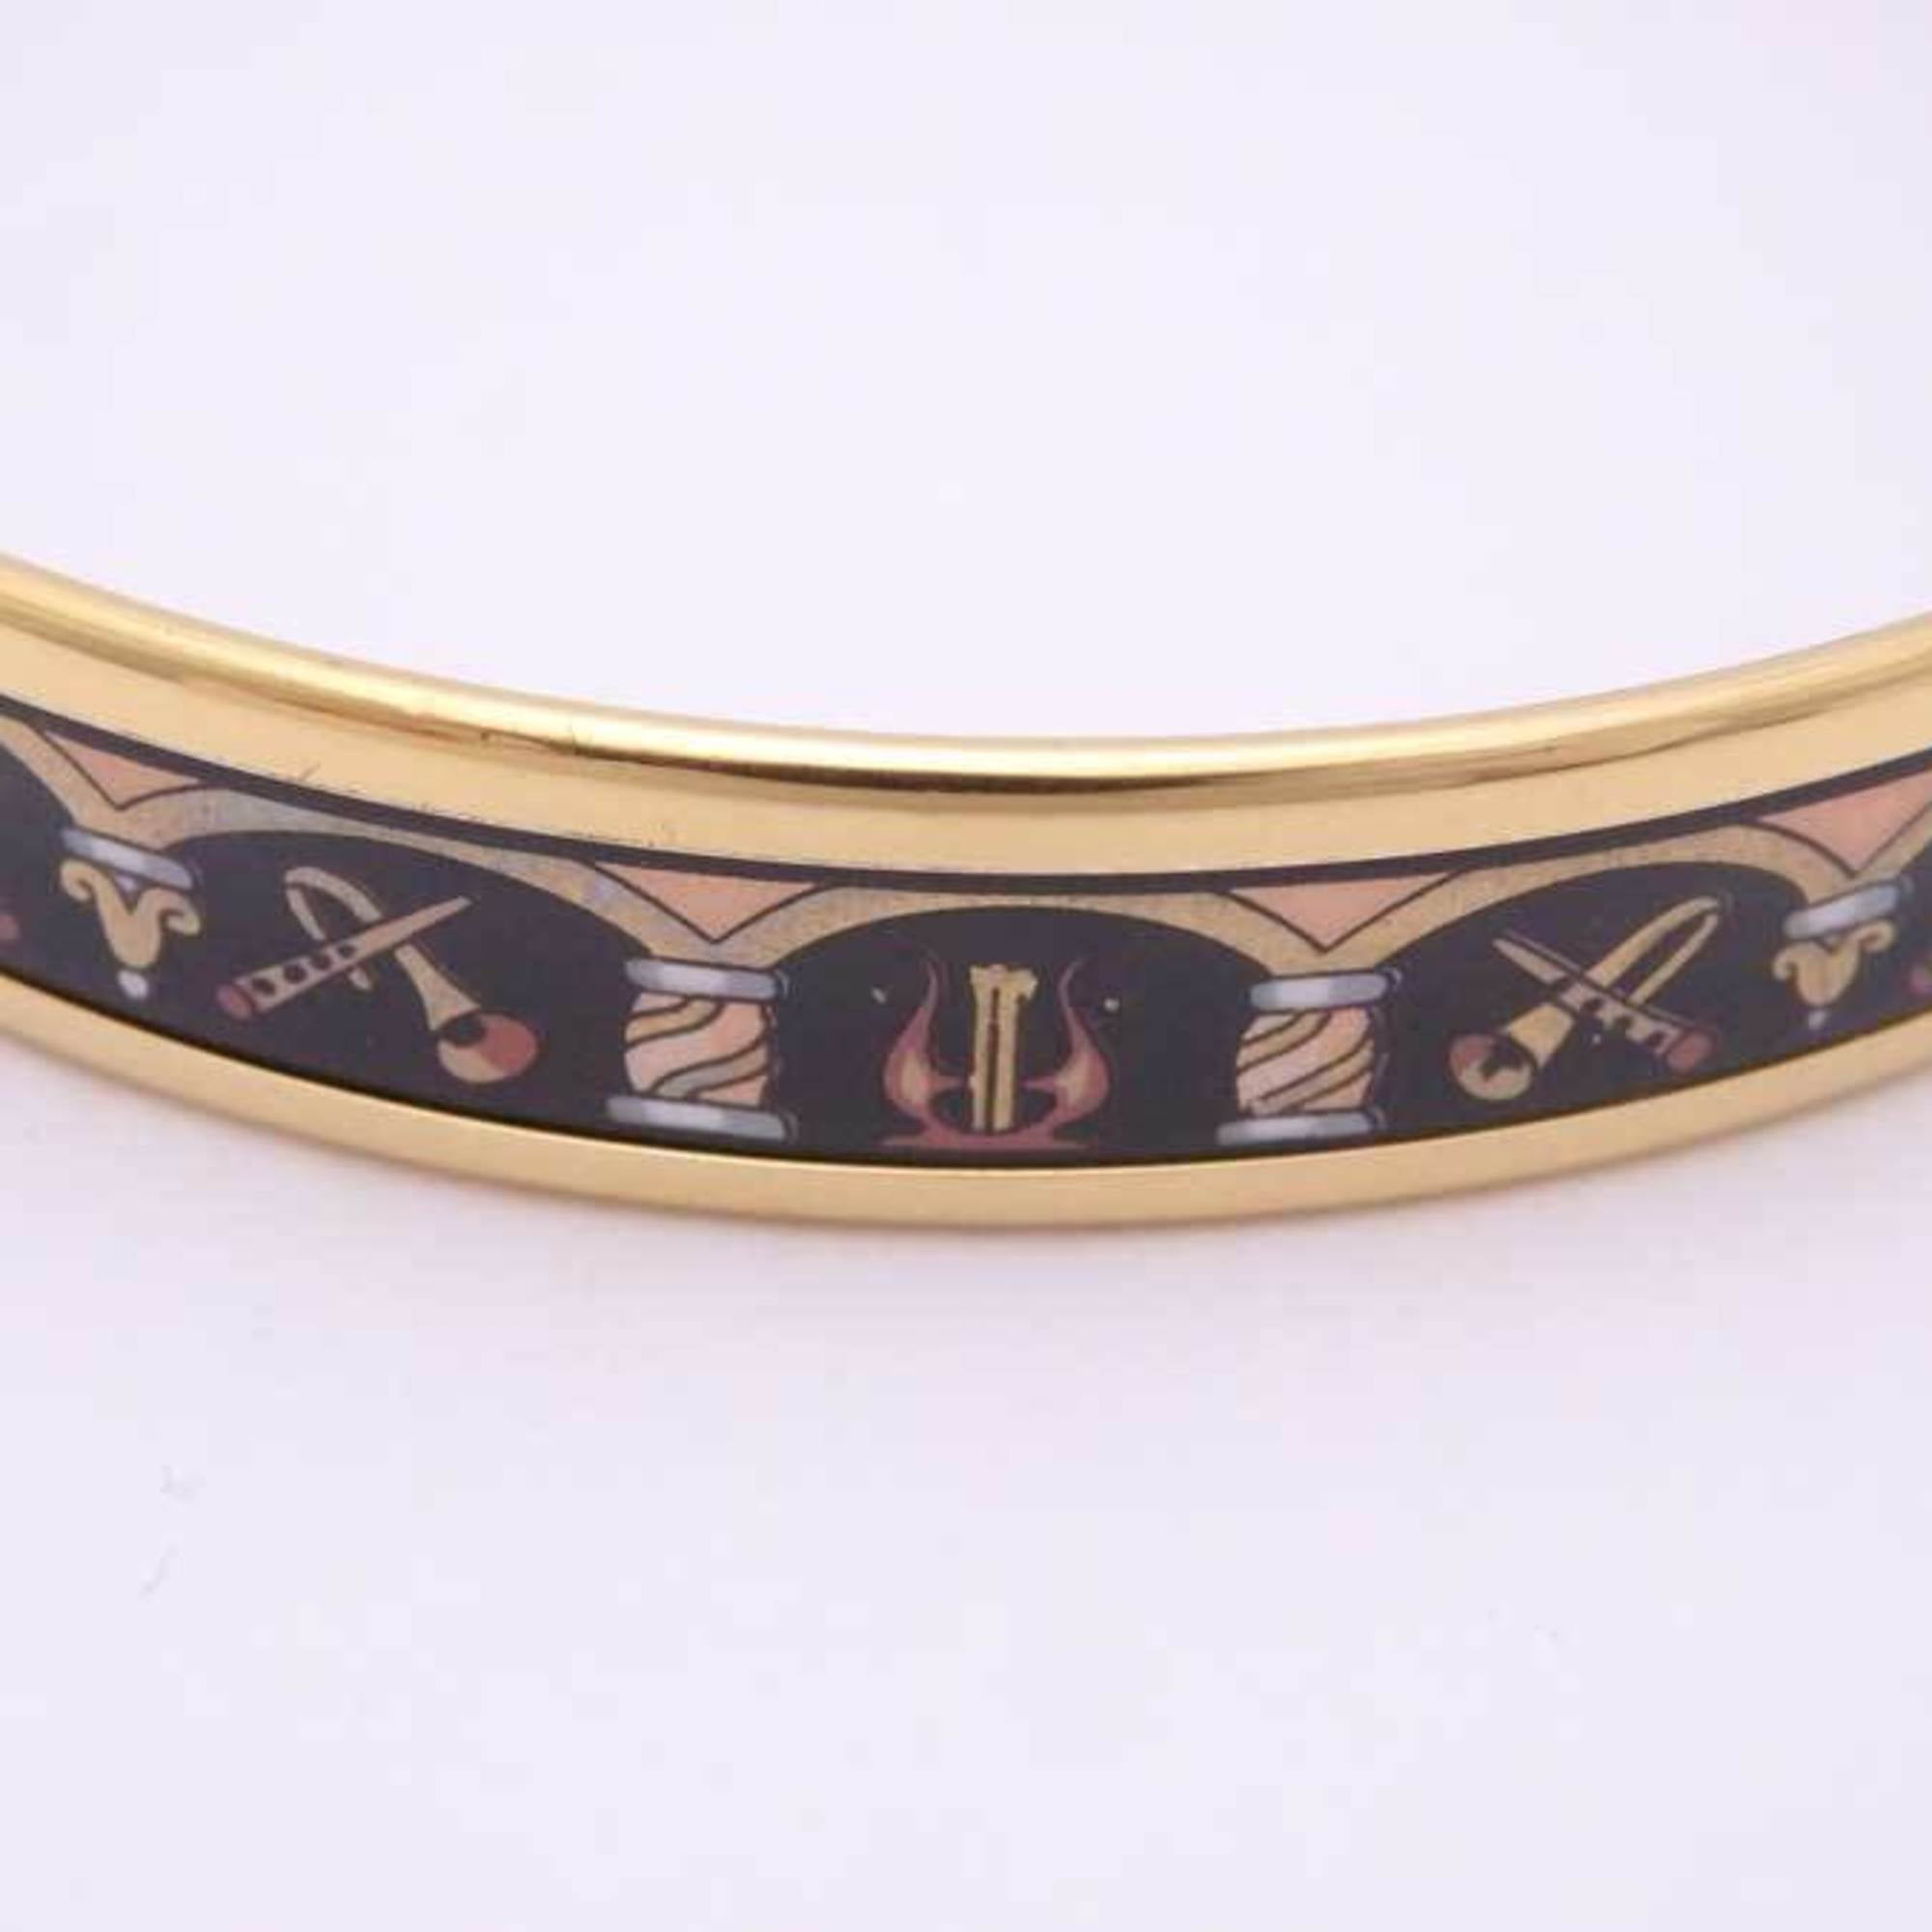 Authenticated Used Hermes HERMES Bangle Bracelet Email Metal